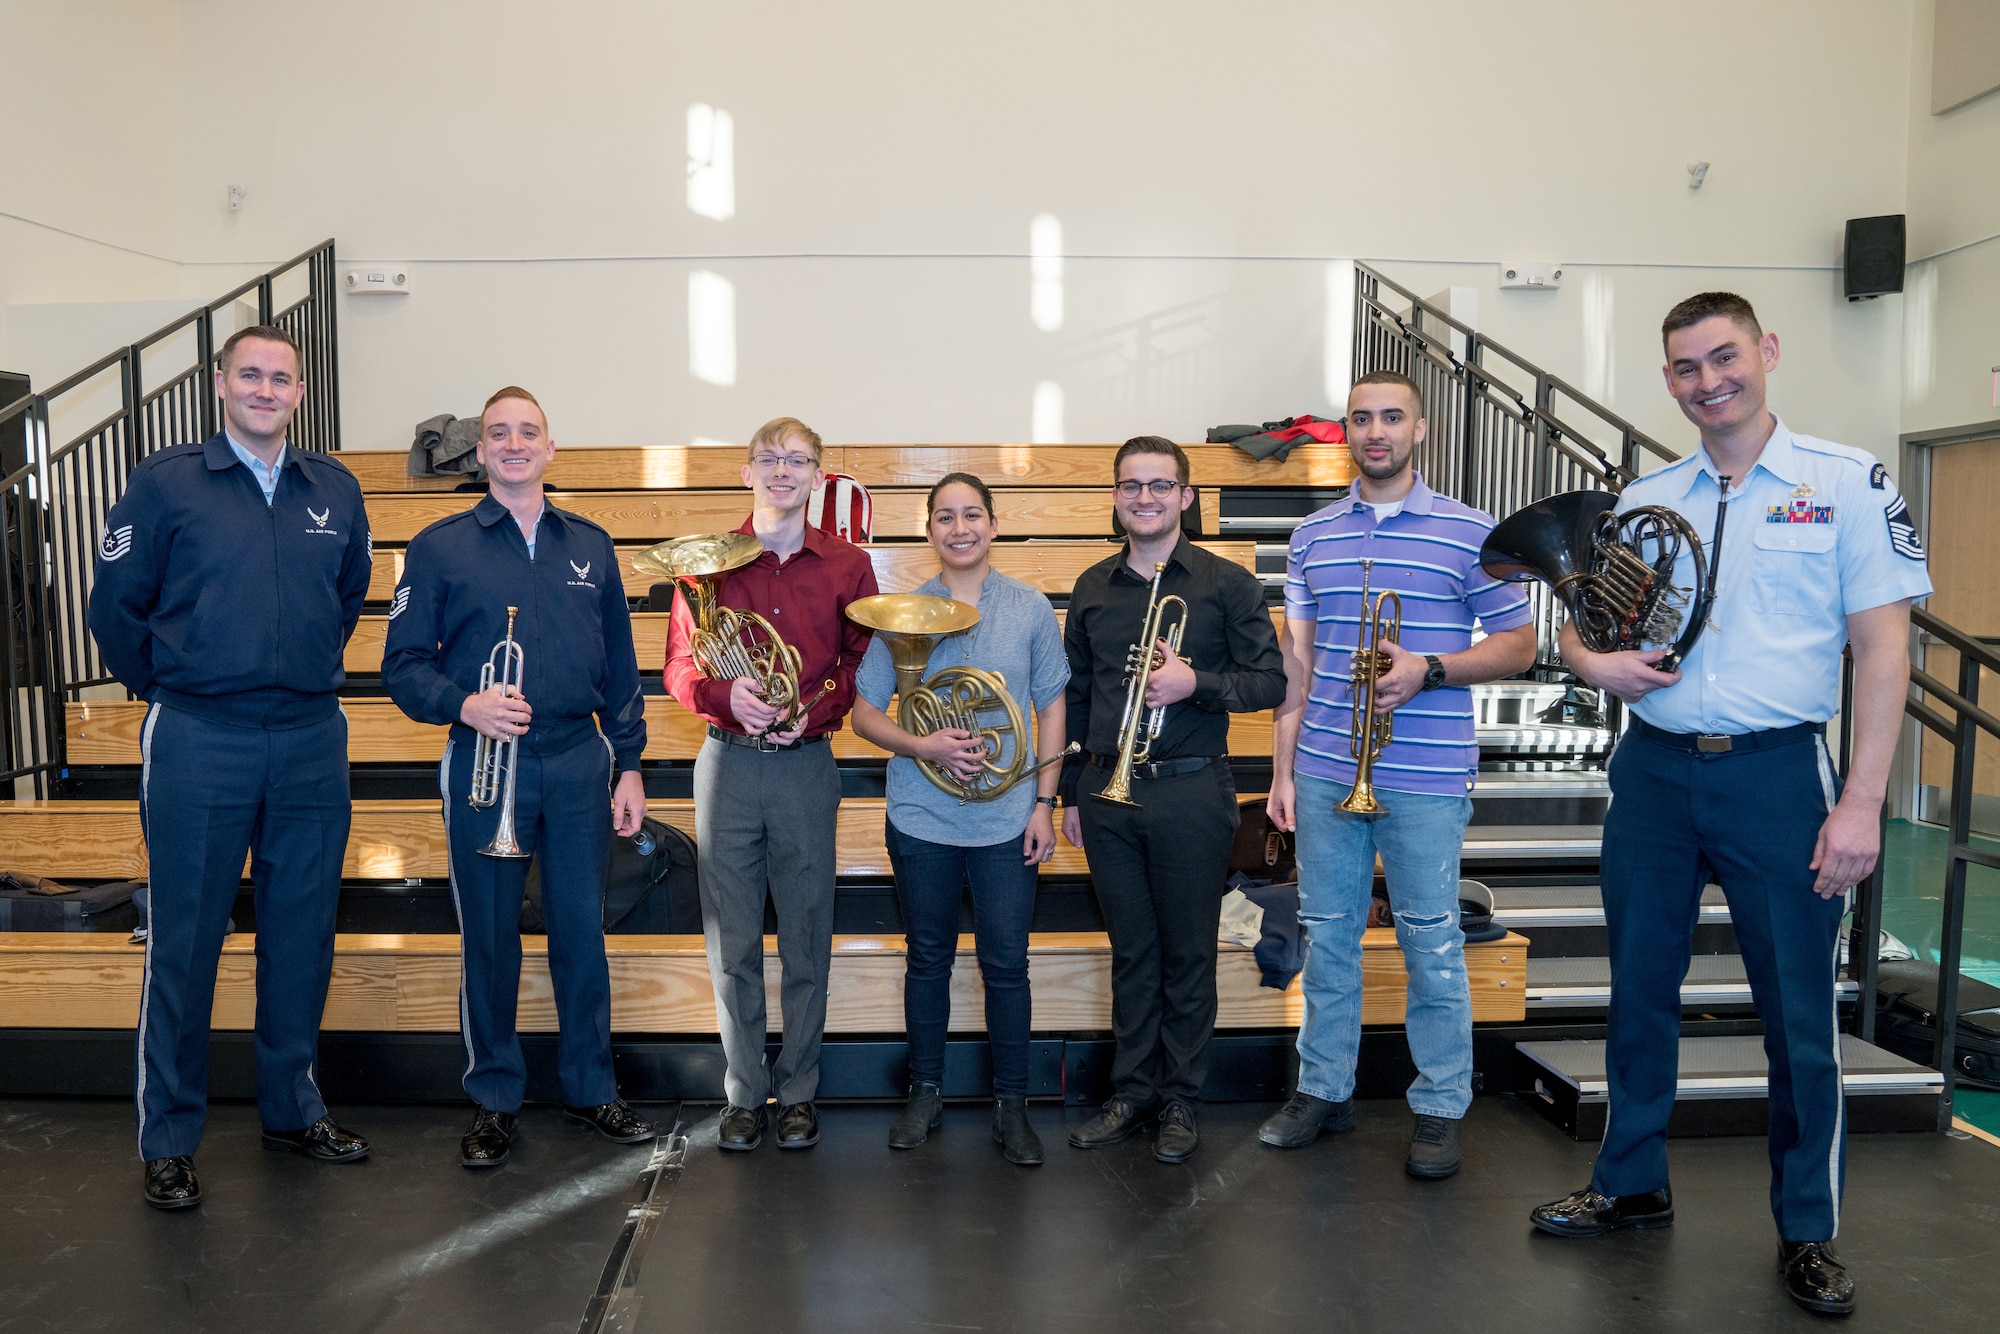 French horn student, Andrew Stump (third from left), poses with other brass instrumentalists during a rehearsal break at the Rachel M. Schlesinger Concert Hall and Arts Center in Alexandria, Virginia. The rehearsal was part of The U.S. Air Force Band's 2019 Collegiate Symposium, which afforded Stump and his father, clarinetist Senior Master Sgt. David Stump, the unique opportunity to perform together on stage for the final concert on Saturday, Feb. 2, 2019. (U.S. Air Force Photo by MSgt Brandon Chaney)